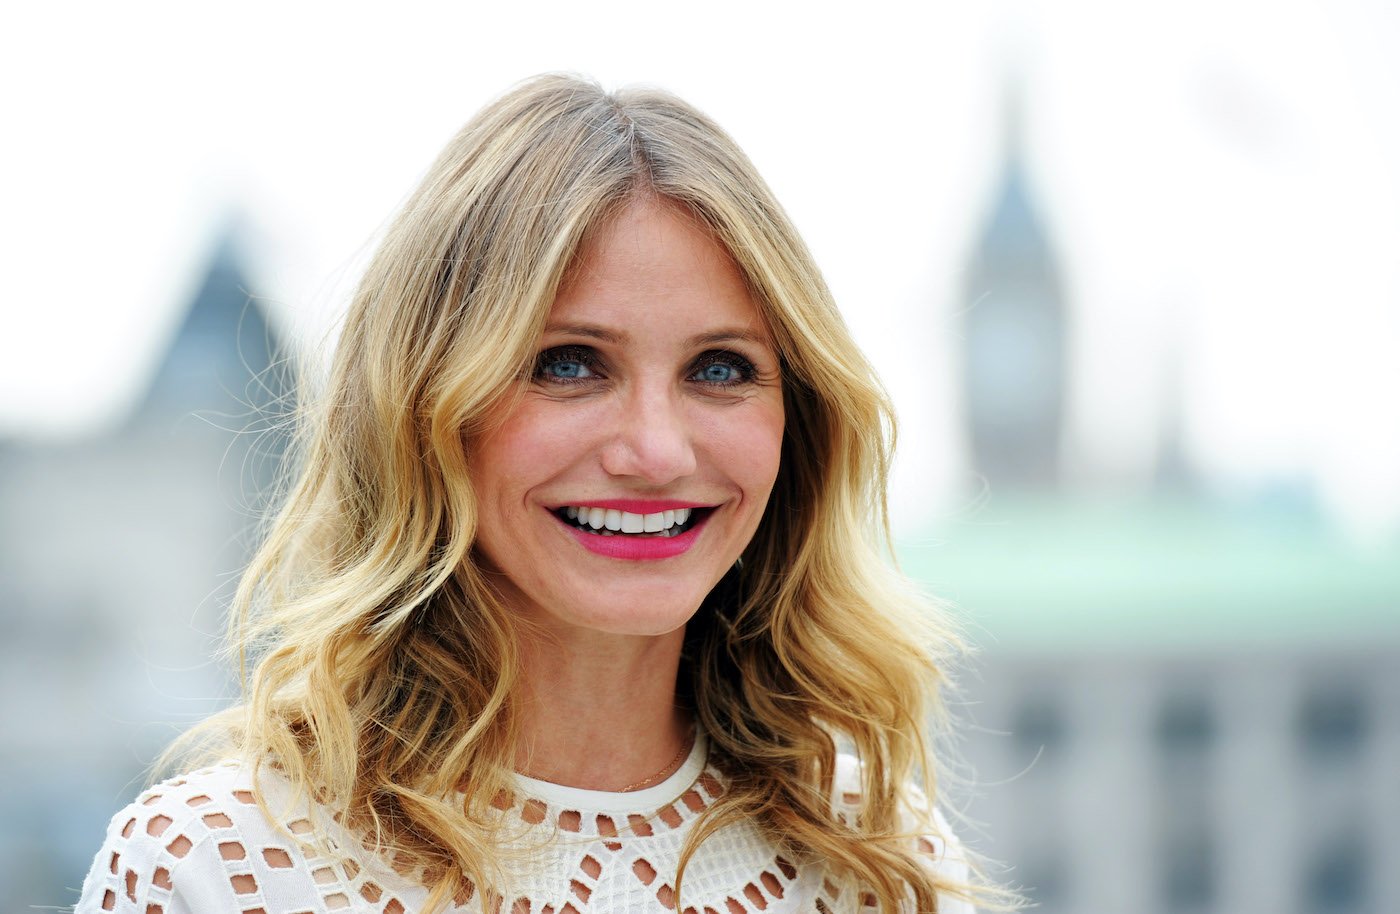 Cameron Diaz at a photo-call for 'Sex Tape'